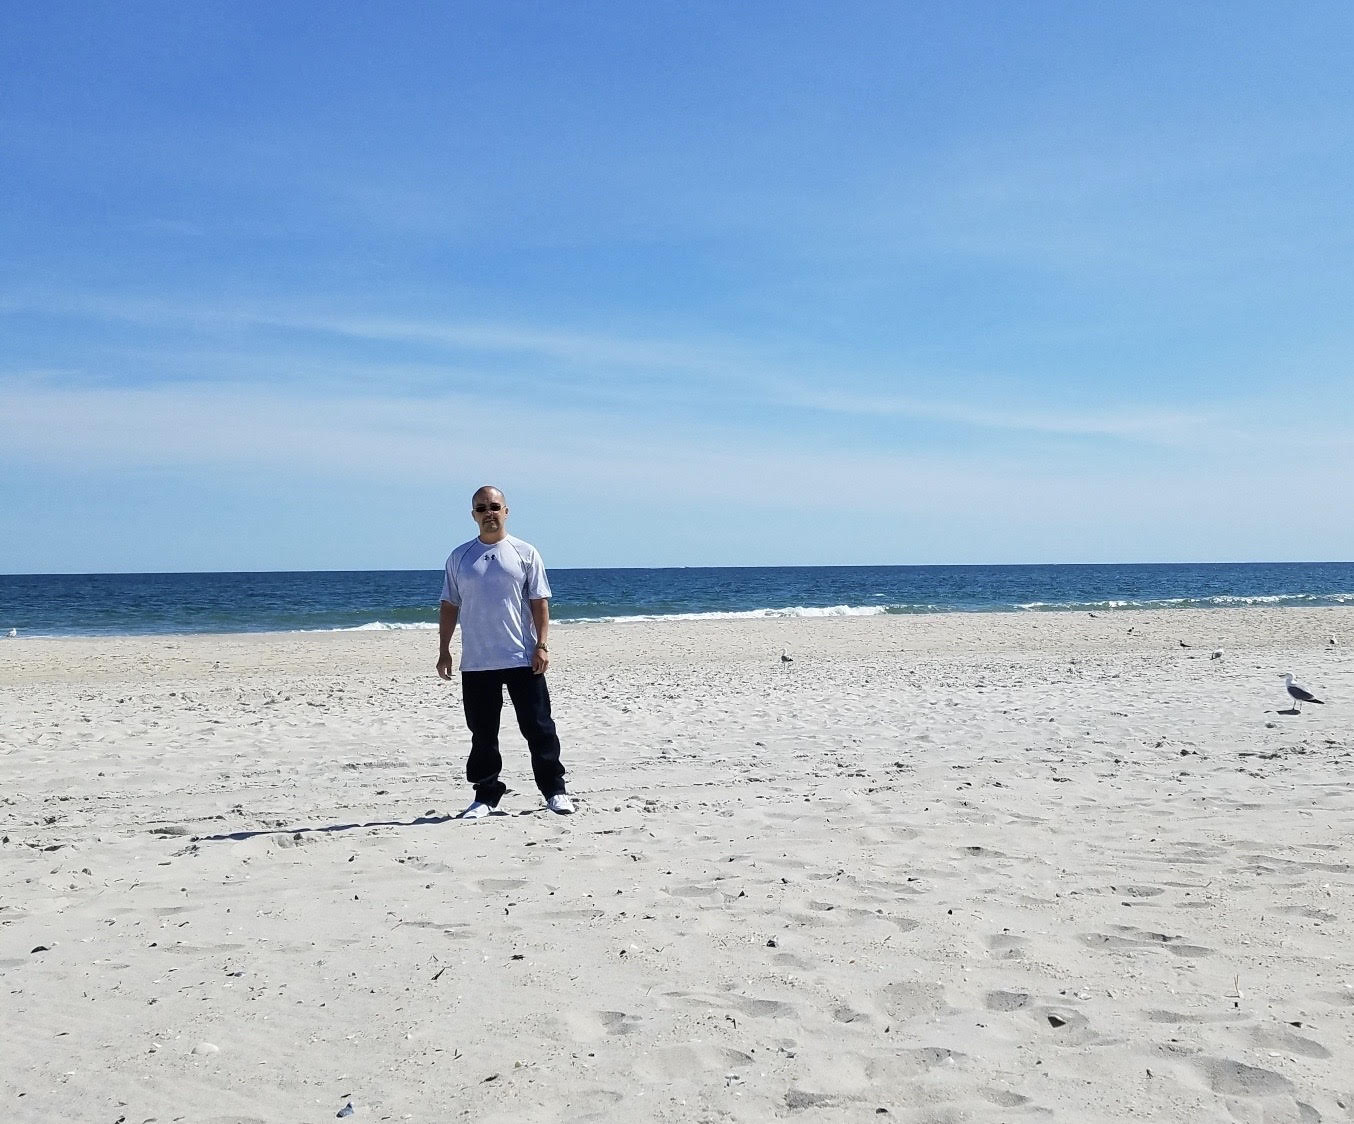 Carlos Sanchez, who spent 25 years in prison for a crime he and his attorneys maintain he did not commit, on the beach for the first time.